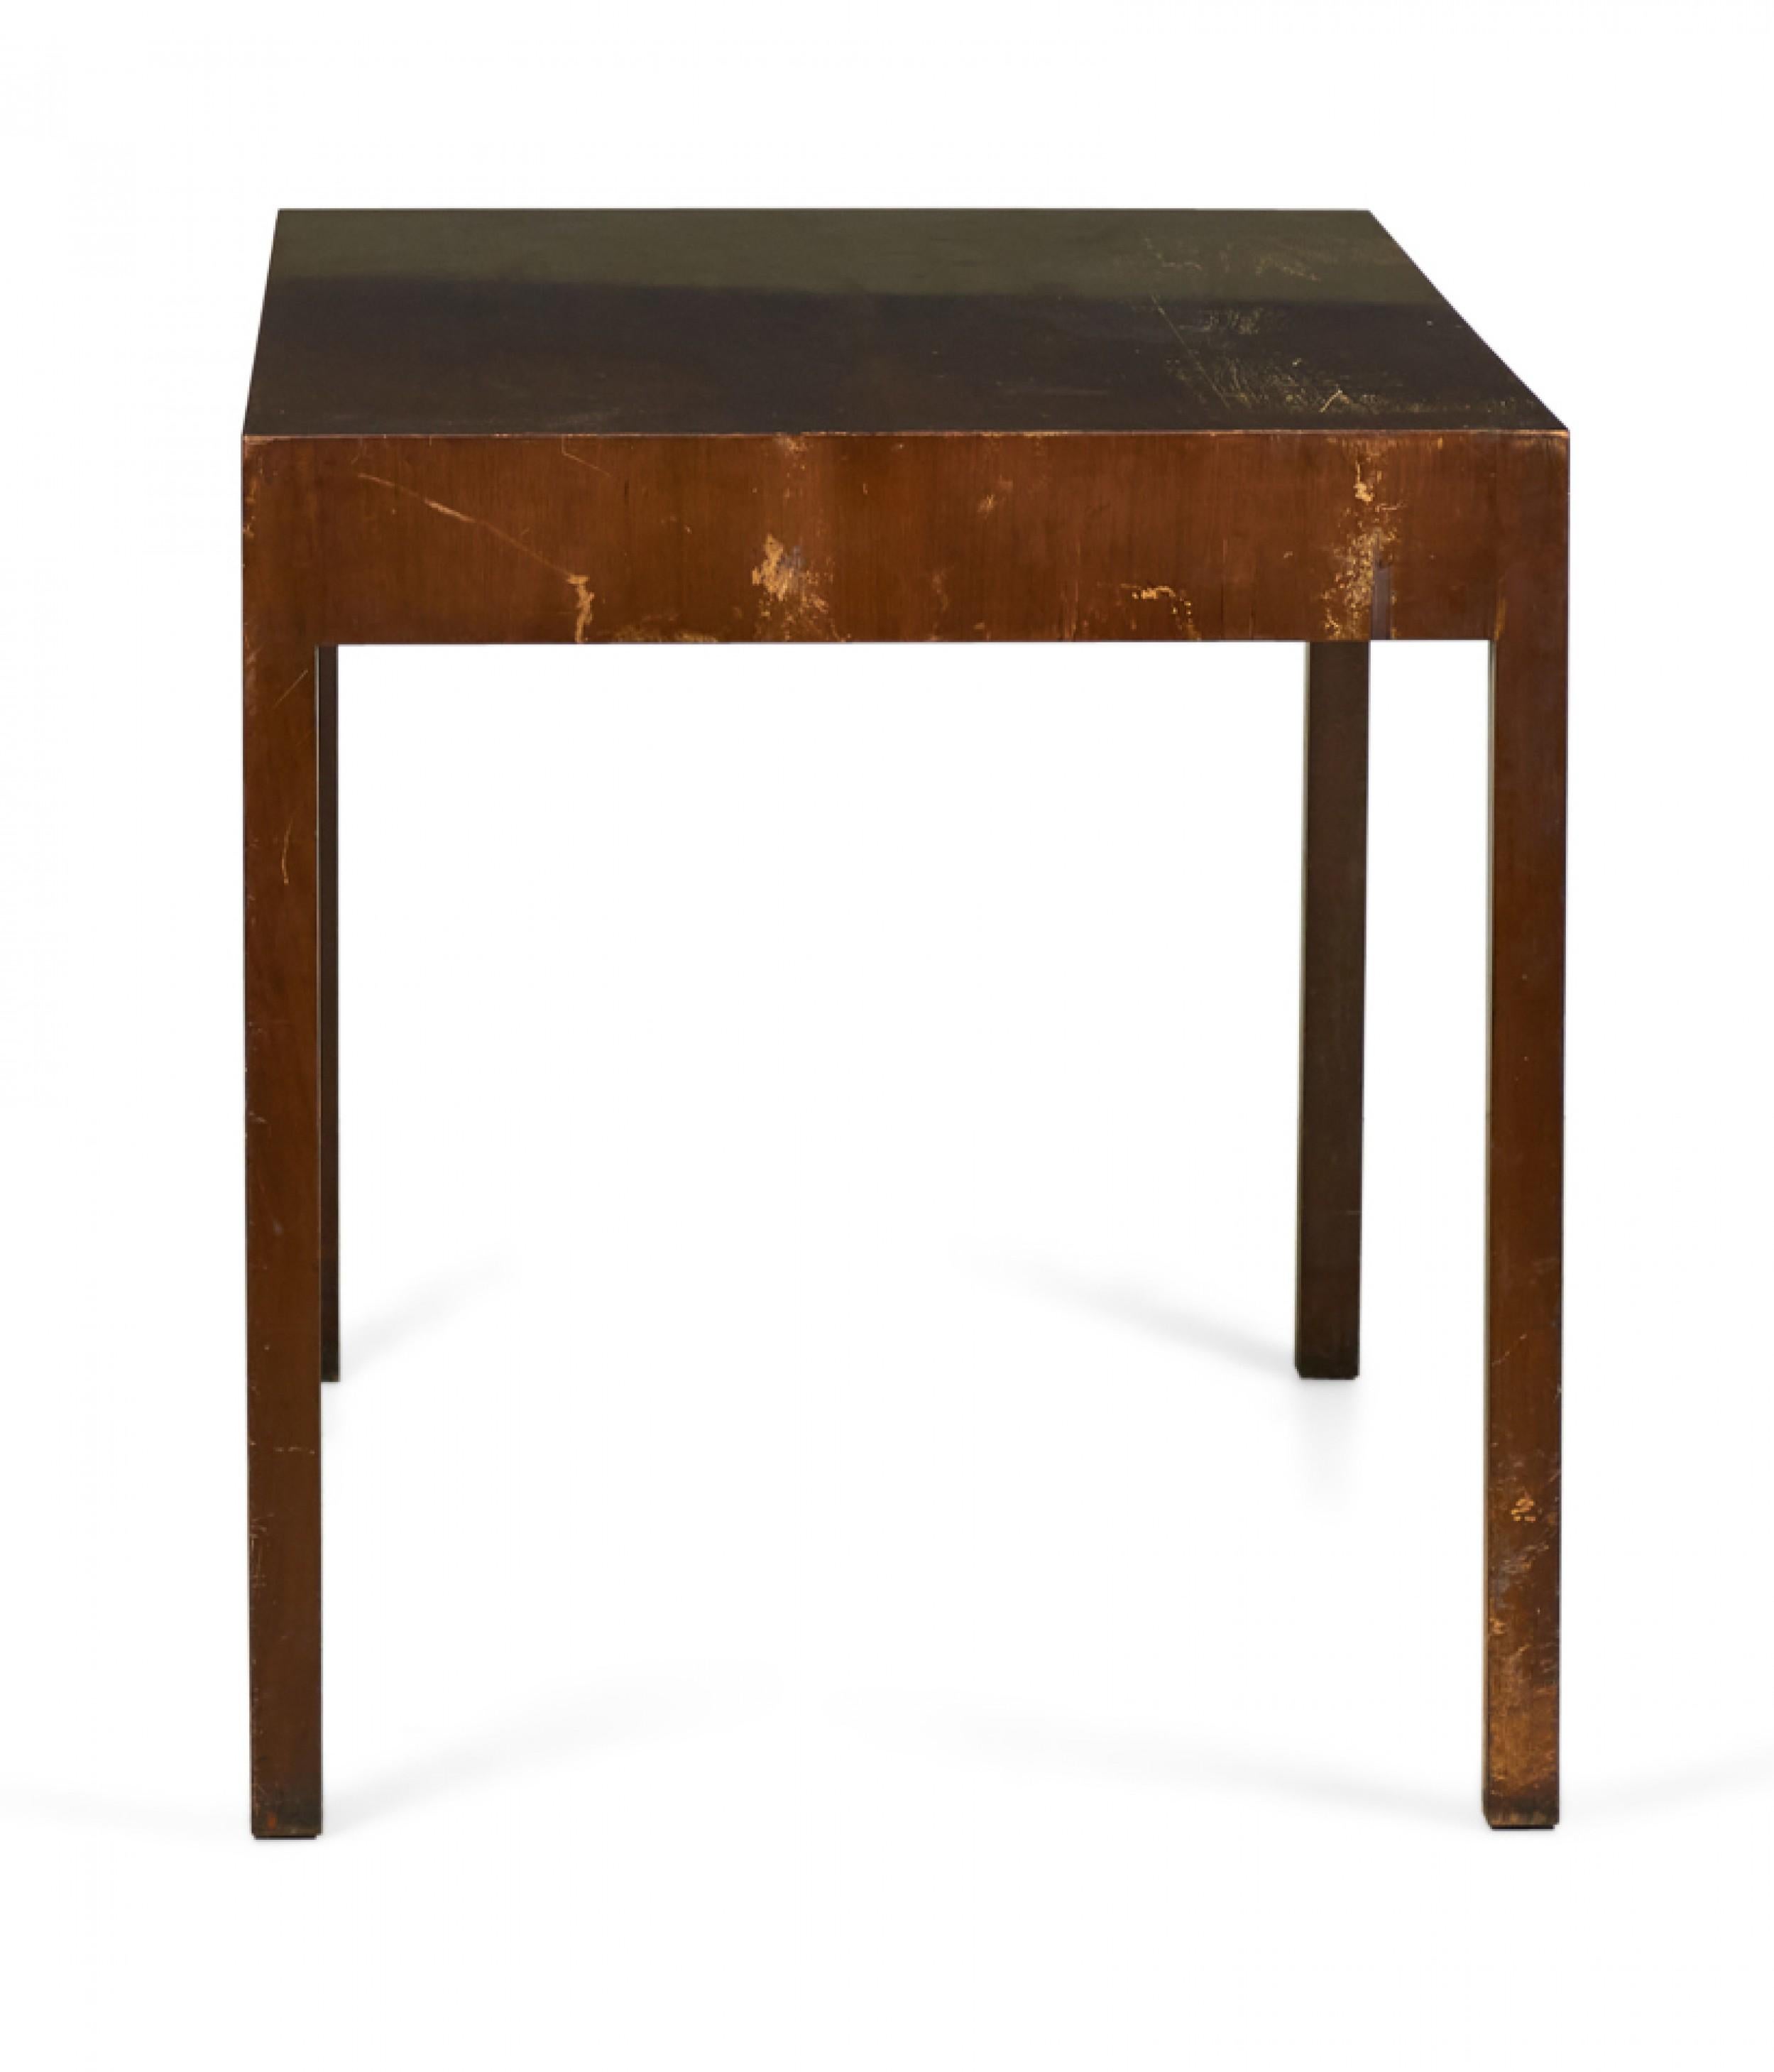 American Mid-Century Parsons-style rectangular partners desk / table with three low-profile drawers on each side.
